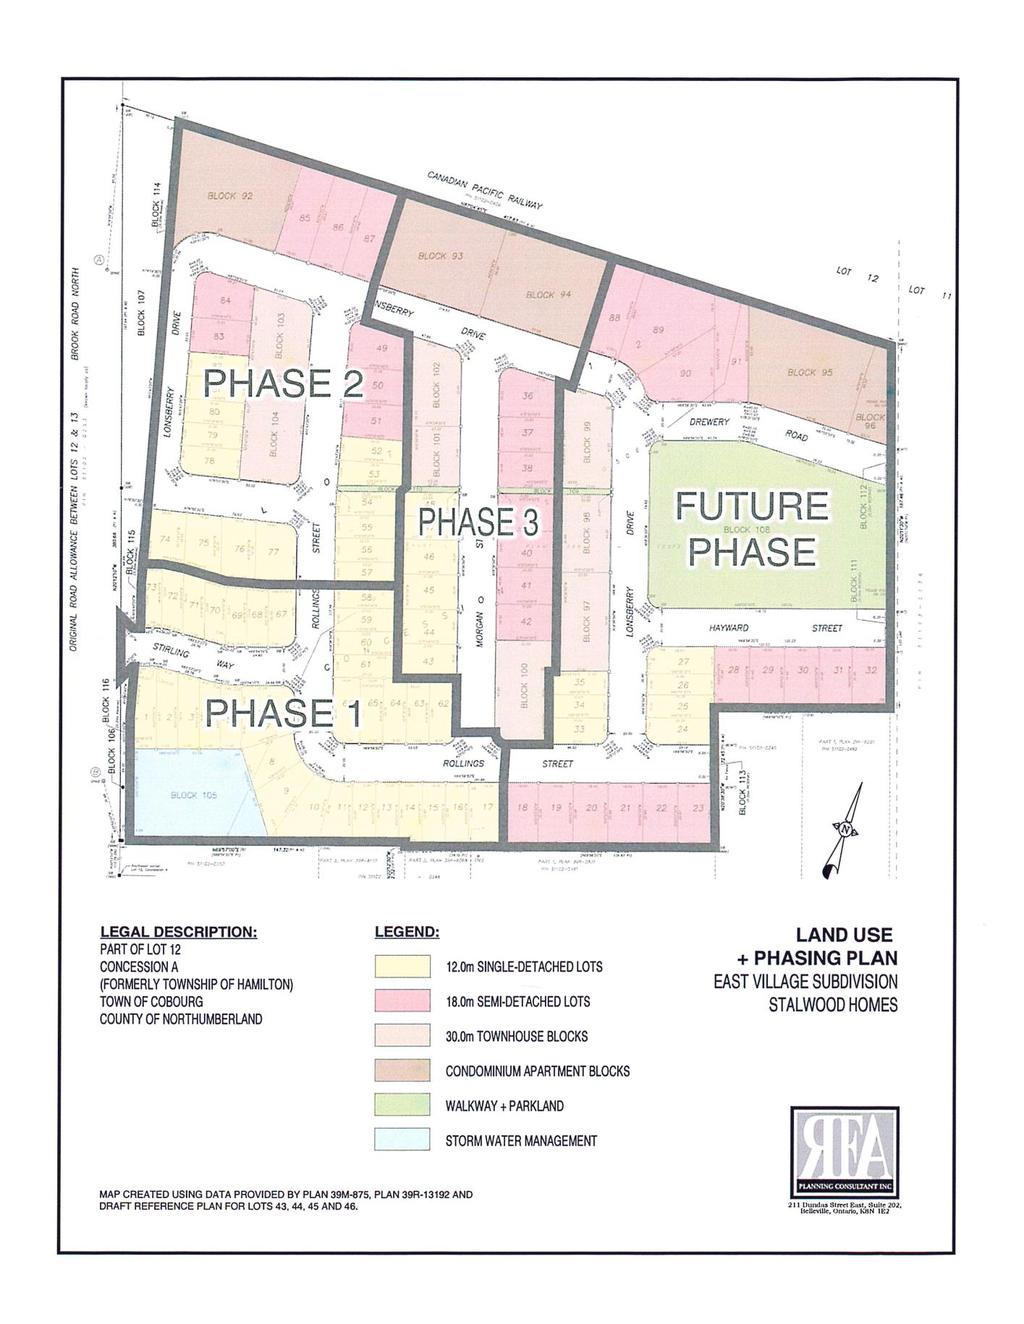 Schedule B East Village Subdivision Land Use and Phasing